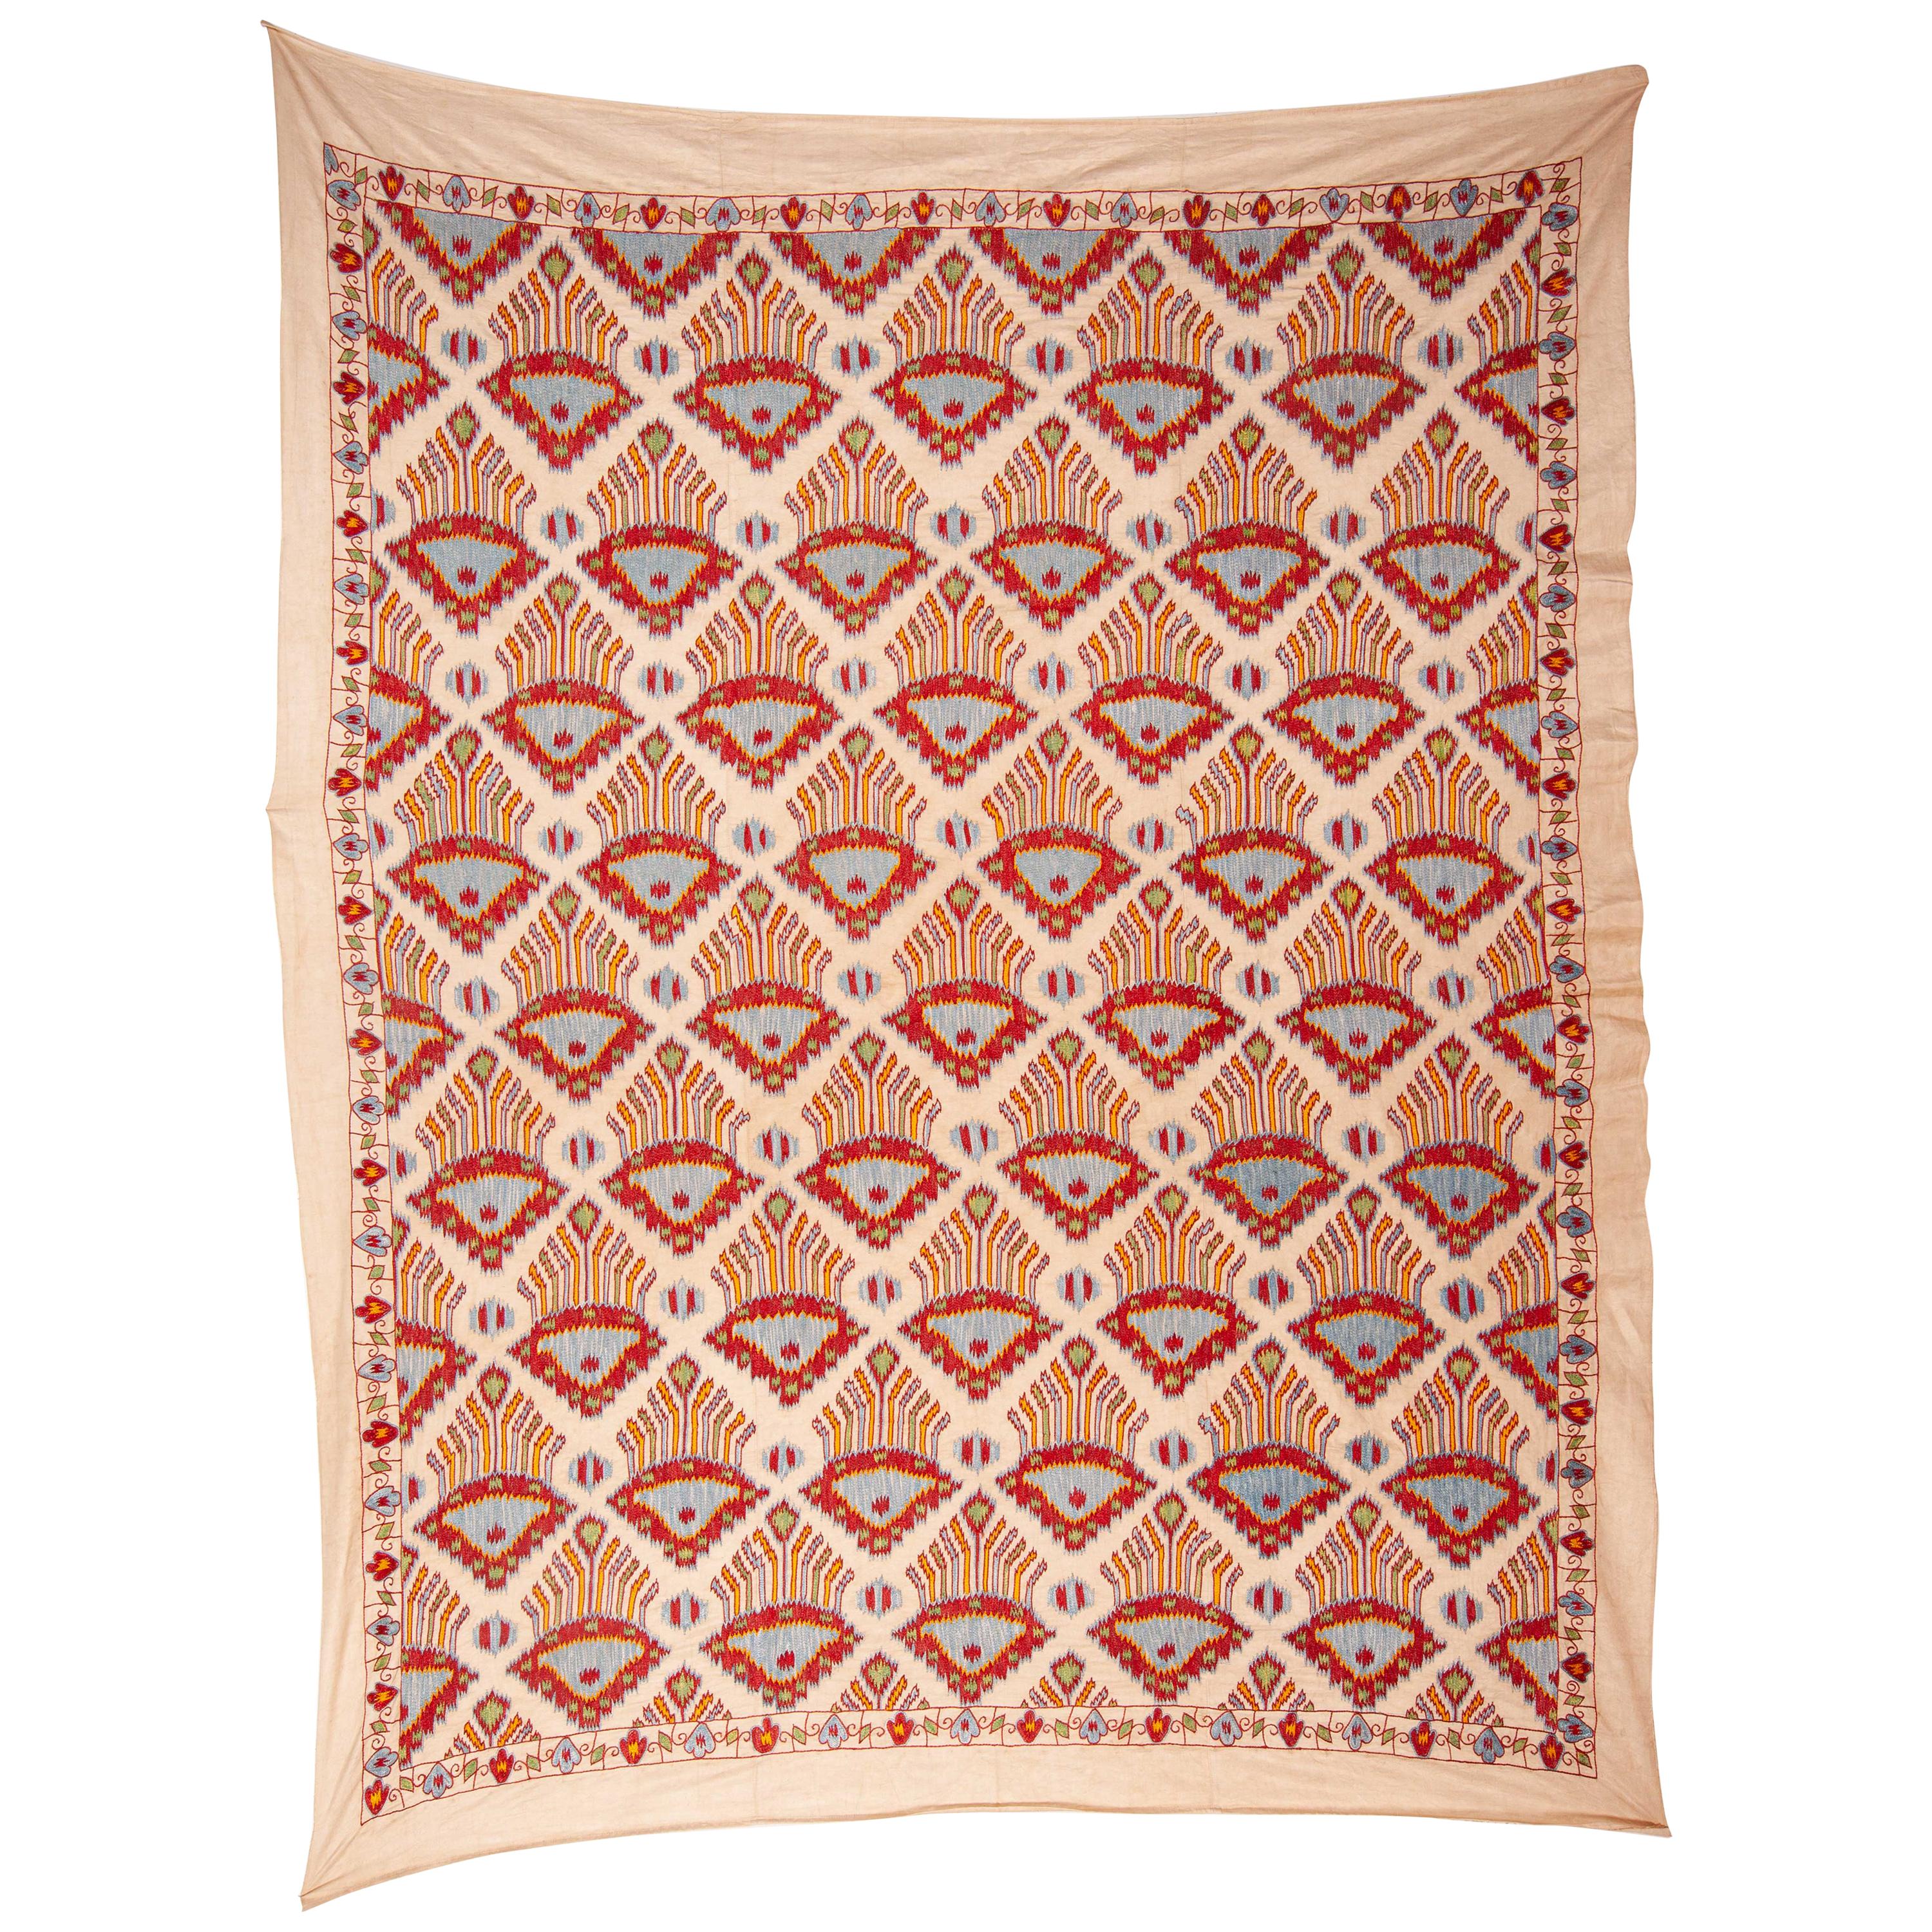 Contemporary Silk Suzani Inspired by Ikat Design, 21st Century